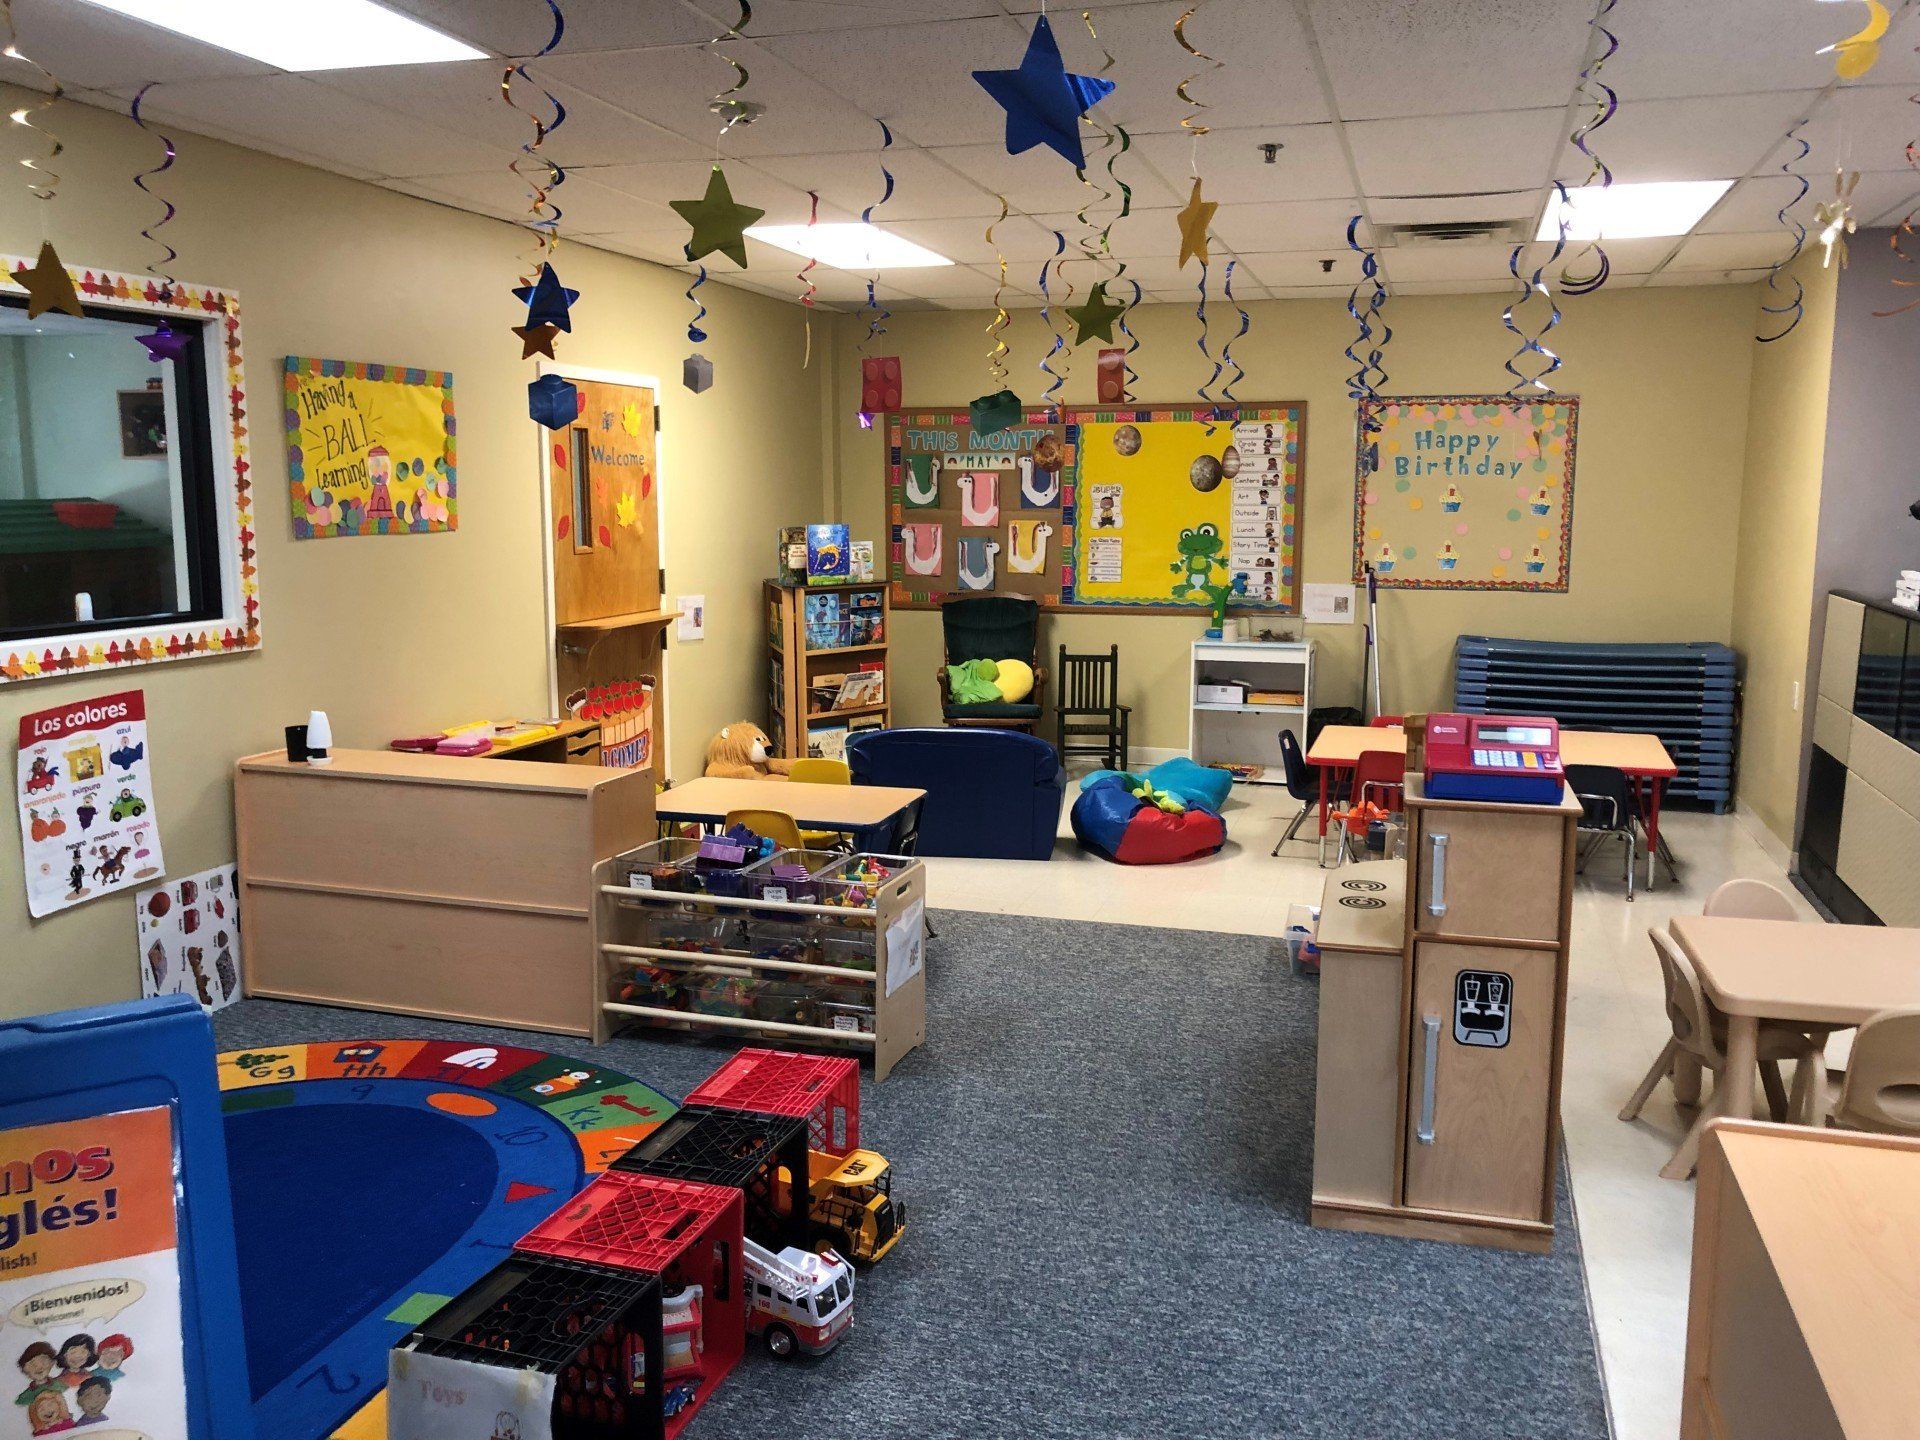 Daycare Interior With Colorful Design — Clifton, NJ — Evergreen Commercial Real Estate Brokers Inc